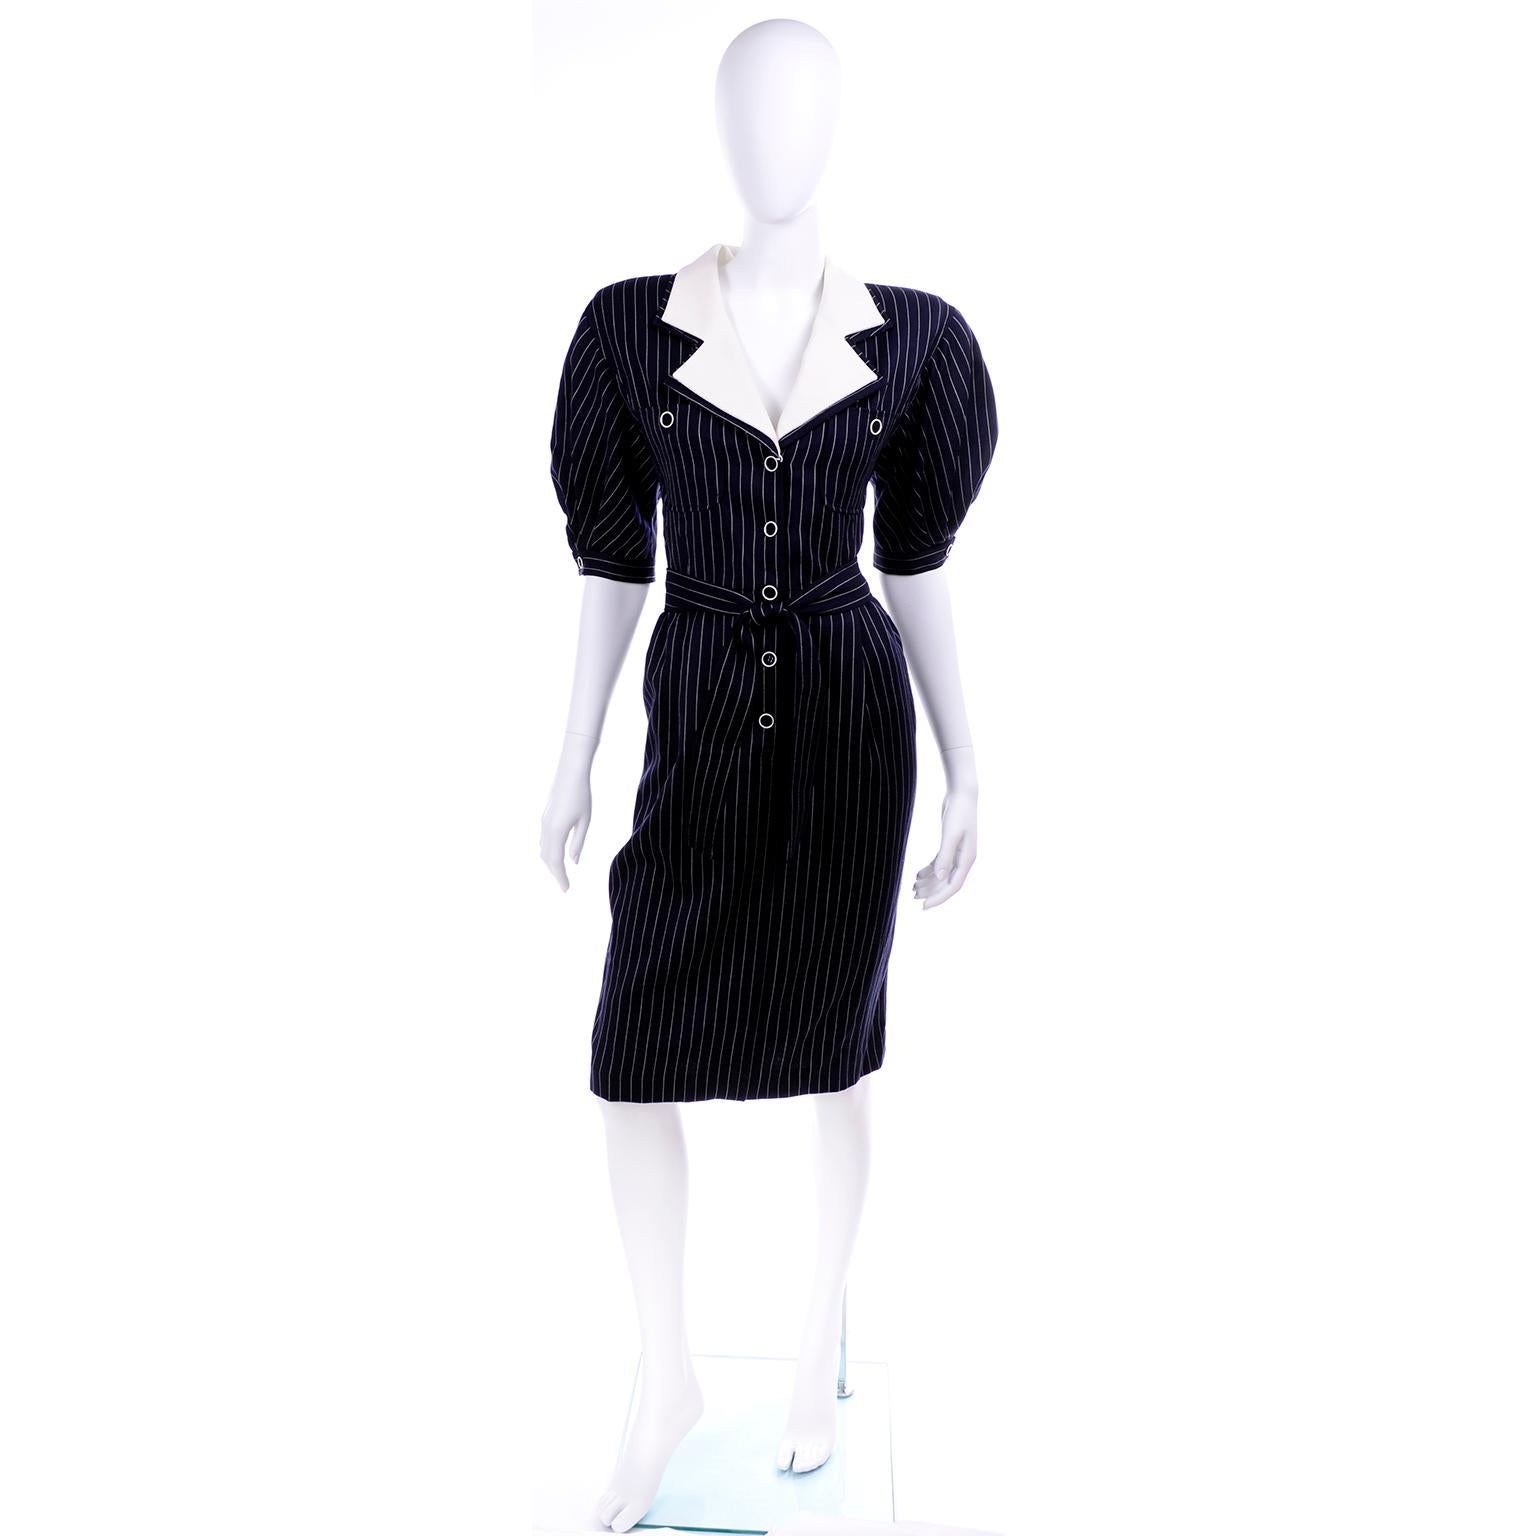 This is a vintage 1980's Dress designed by Emanuel Ungaro in a navy blue and white pinstripe with a waffle weave white collar. The dress buttons up the front and has a sash belt ,gathered, puff short sleeves and shoulder pads. It has its original